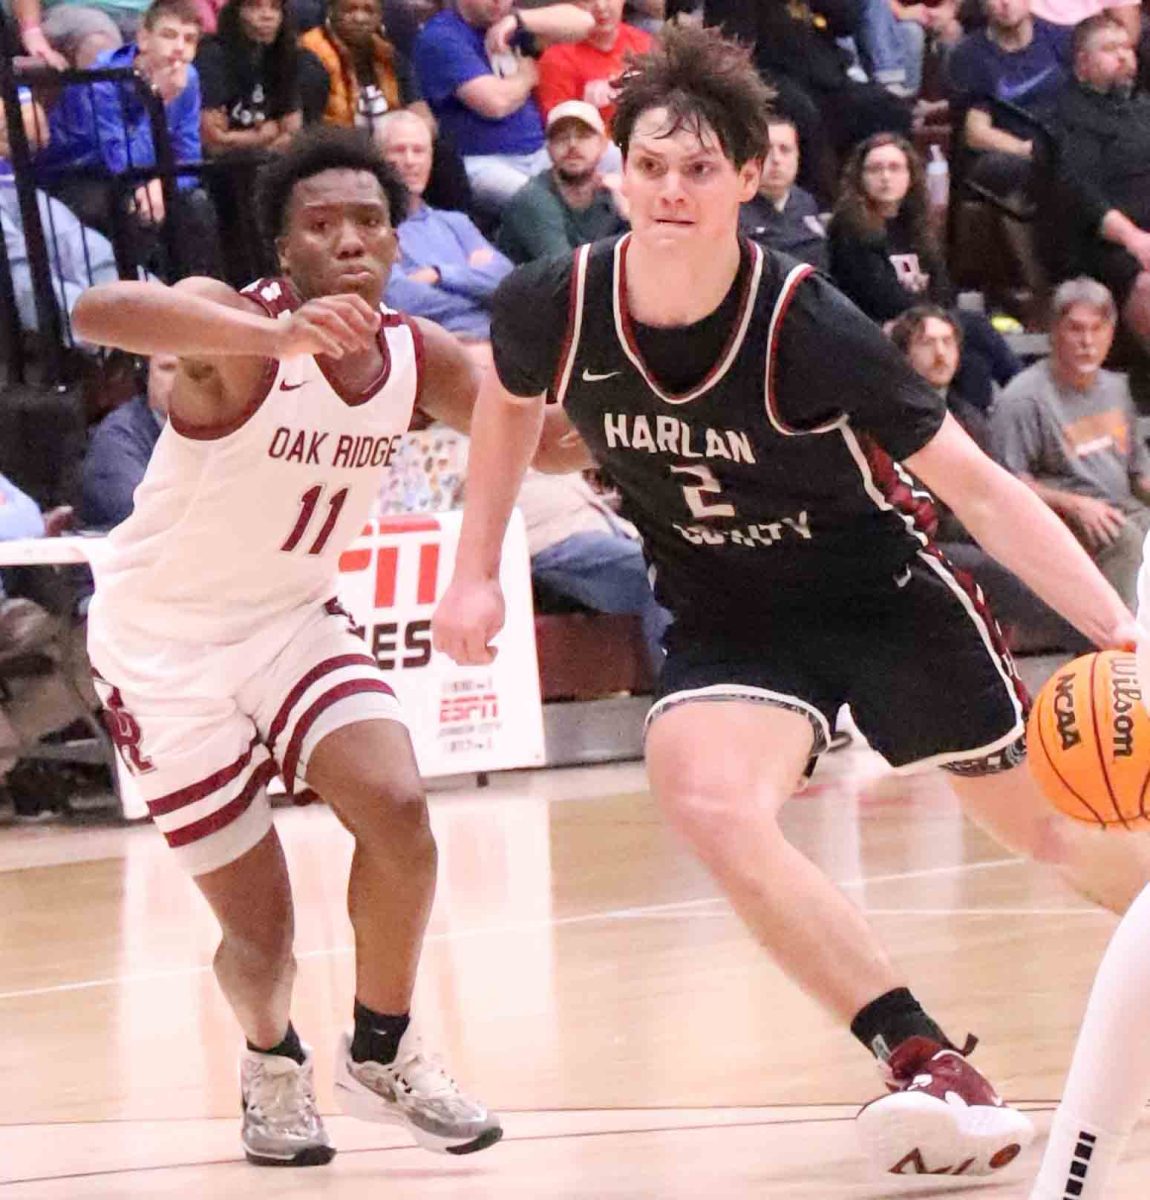 Harlan County guard Trent Noah scored 37 points and pulled down 10 rebounds in the Bears 67-57 win over Oak Ridge, Tenn., on Tuesday in the Arbys Classic.